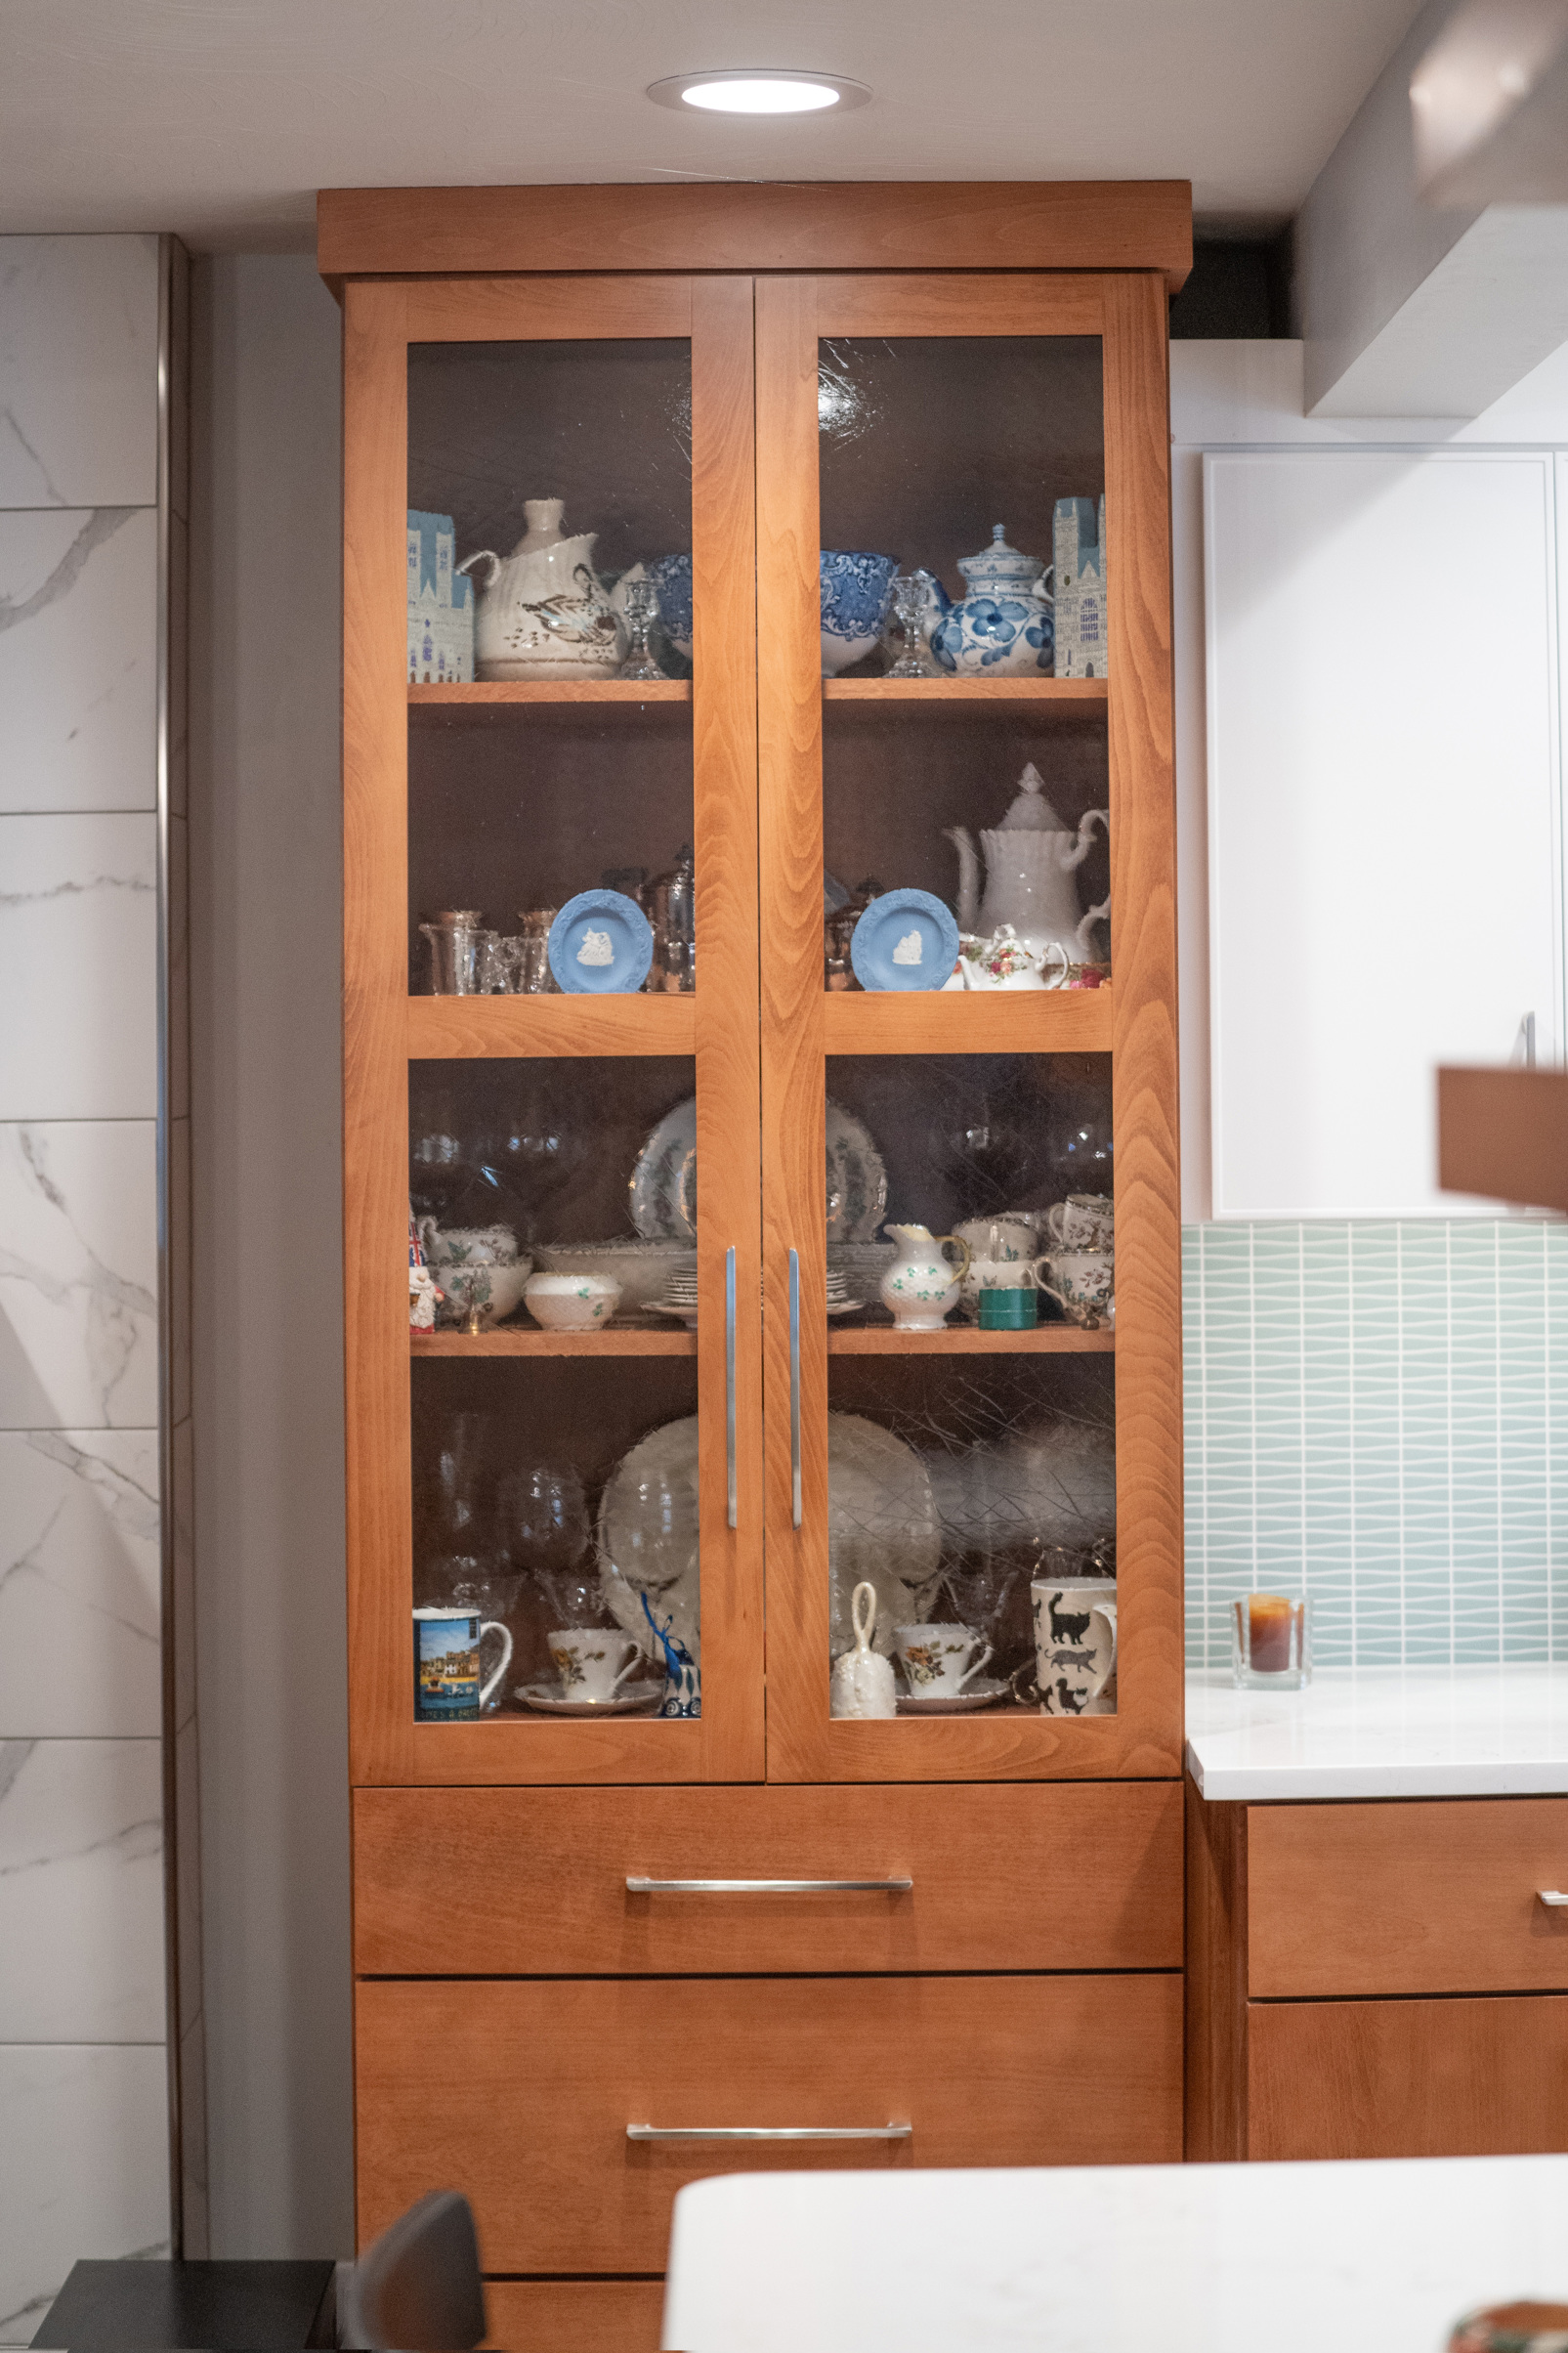 A new wooden china cabinet with drawers